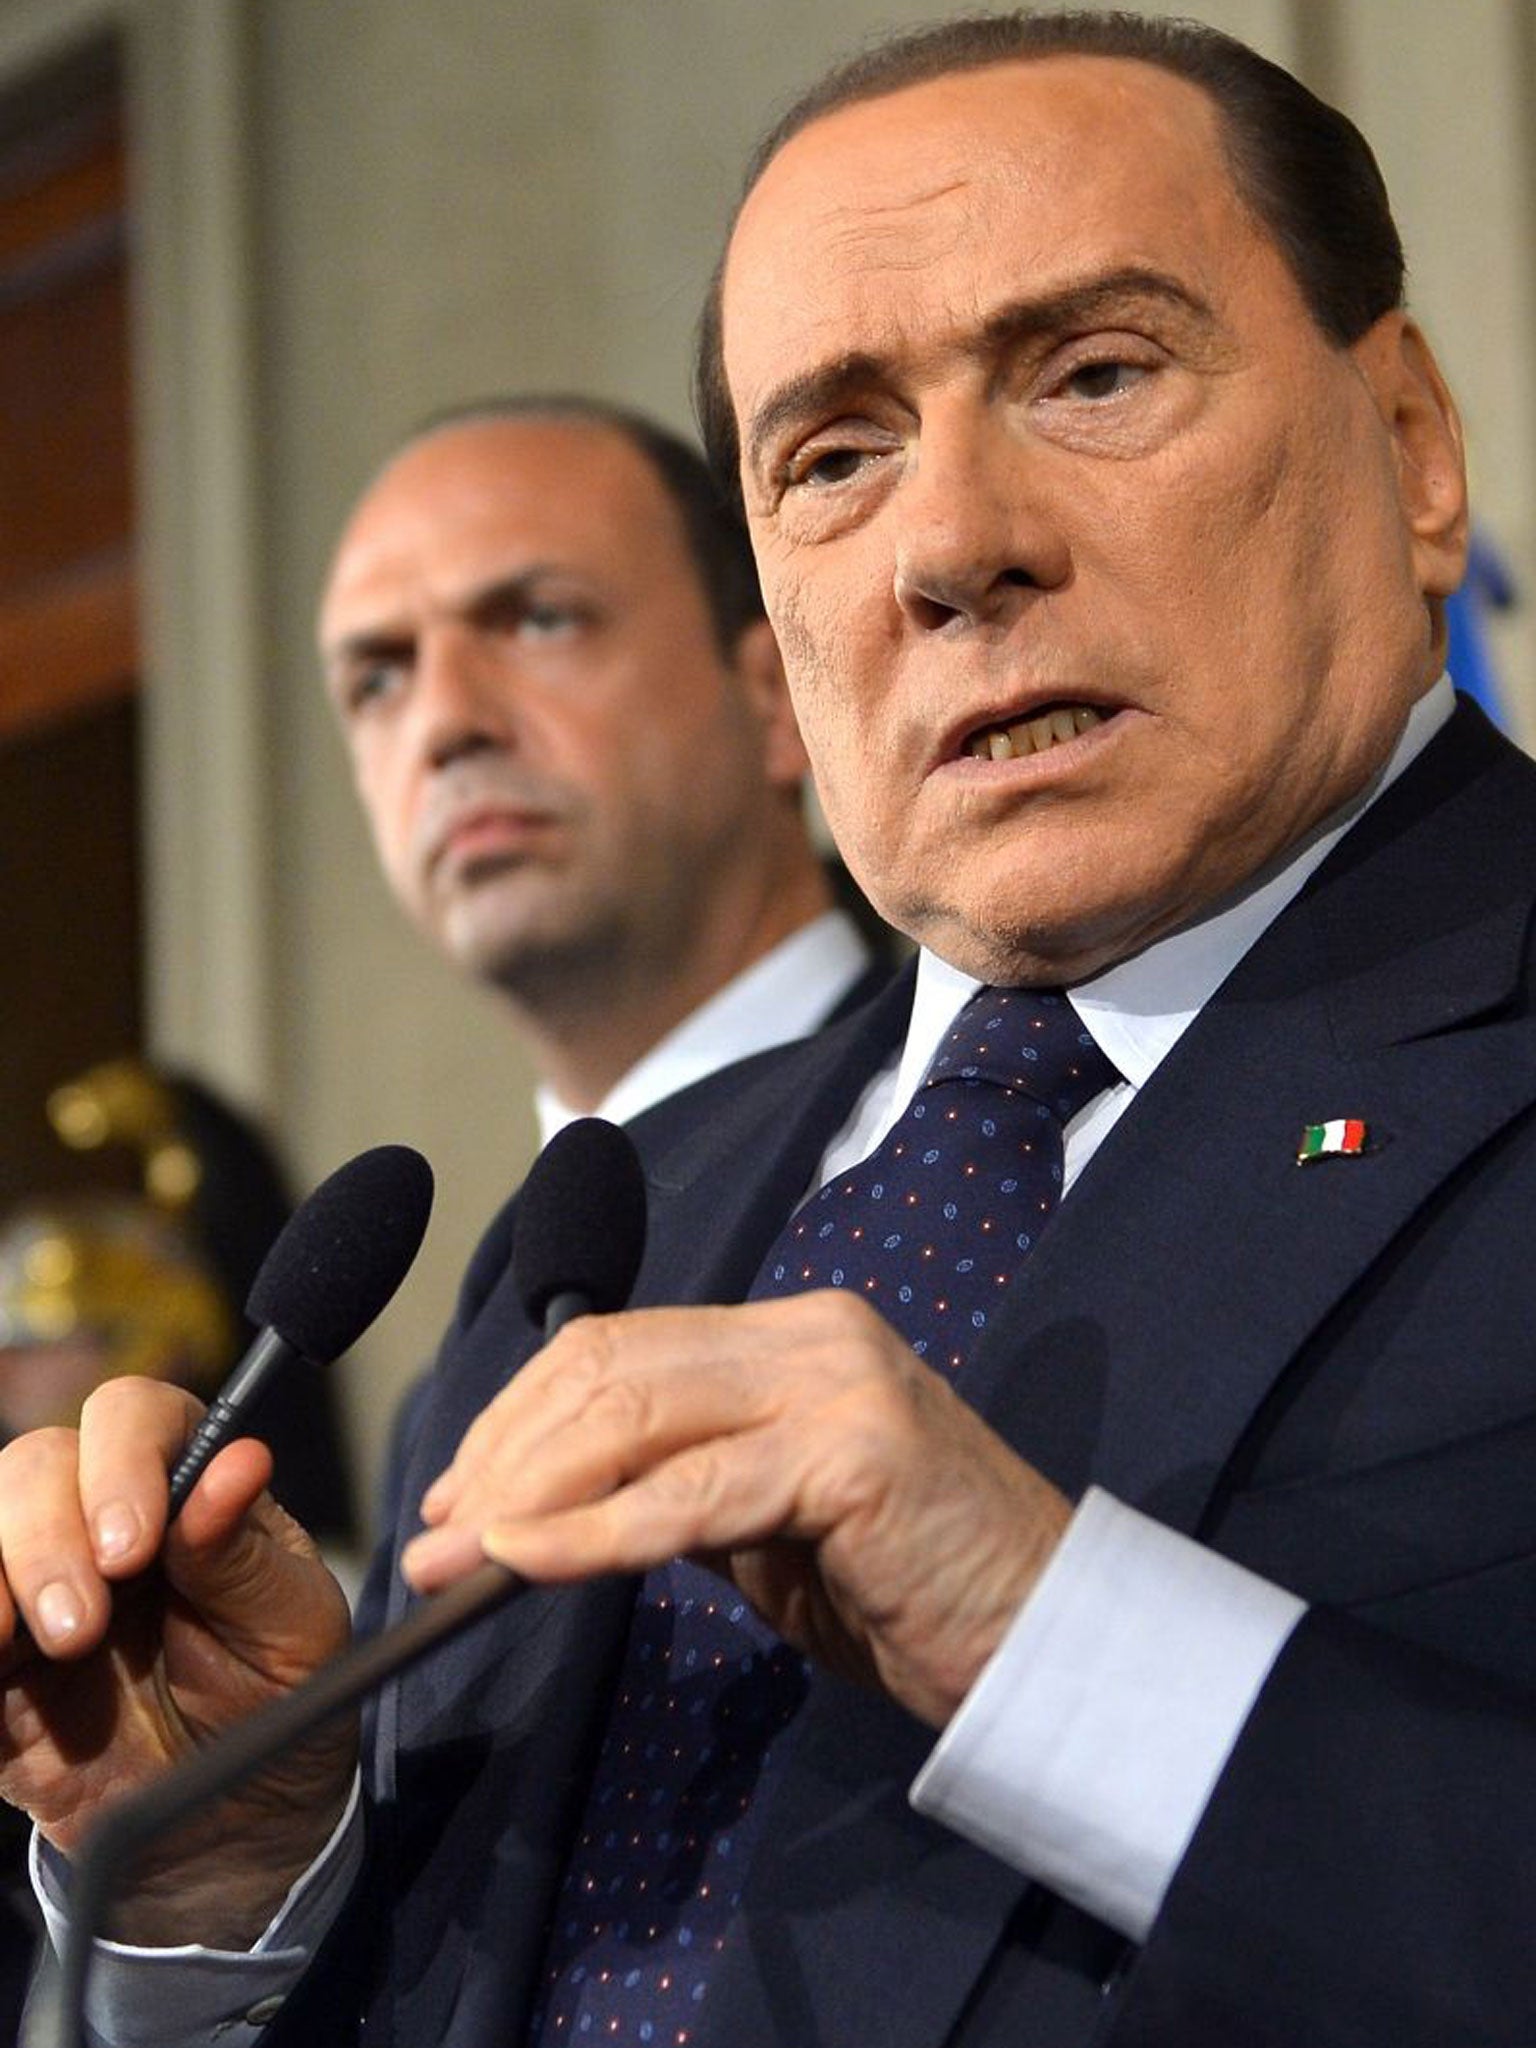 Silvio Berlusconi allegedly paid for sex with “Ruby the Heart Stealer” while she was under age